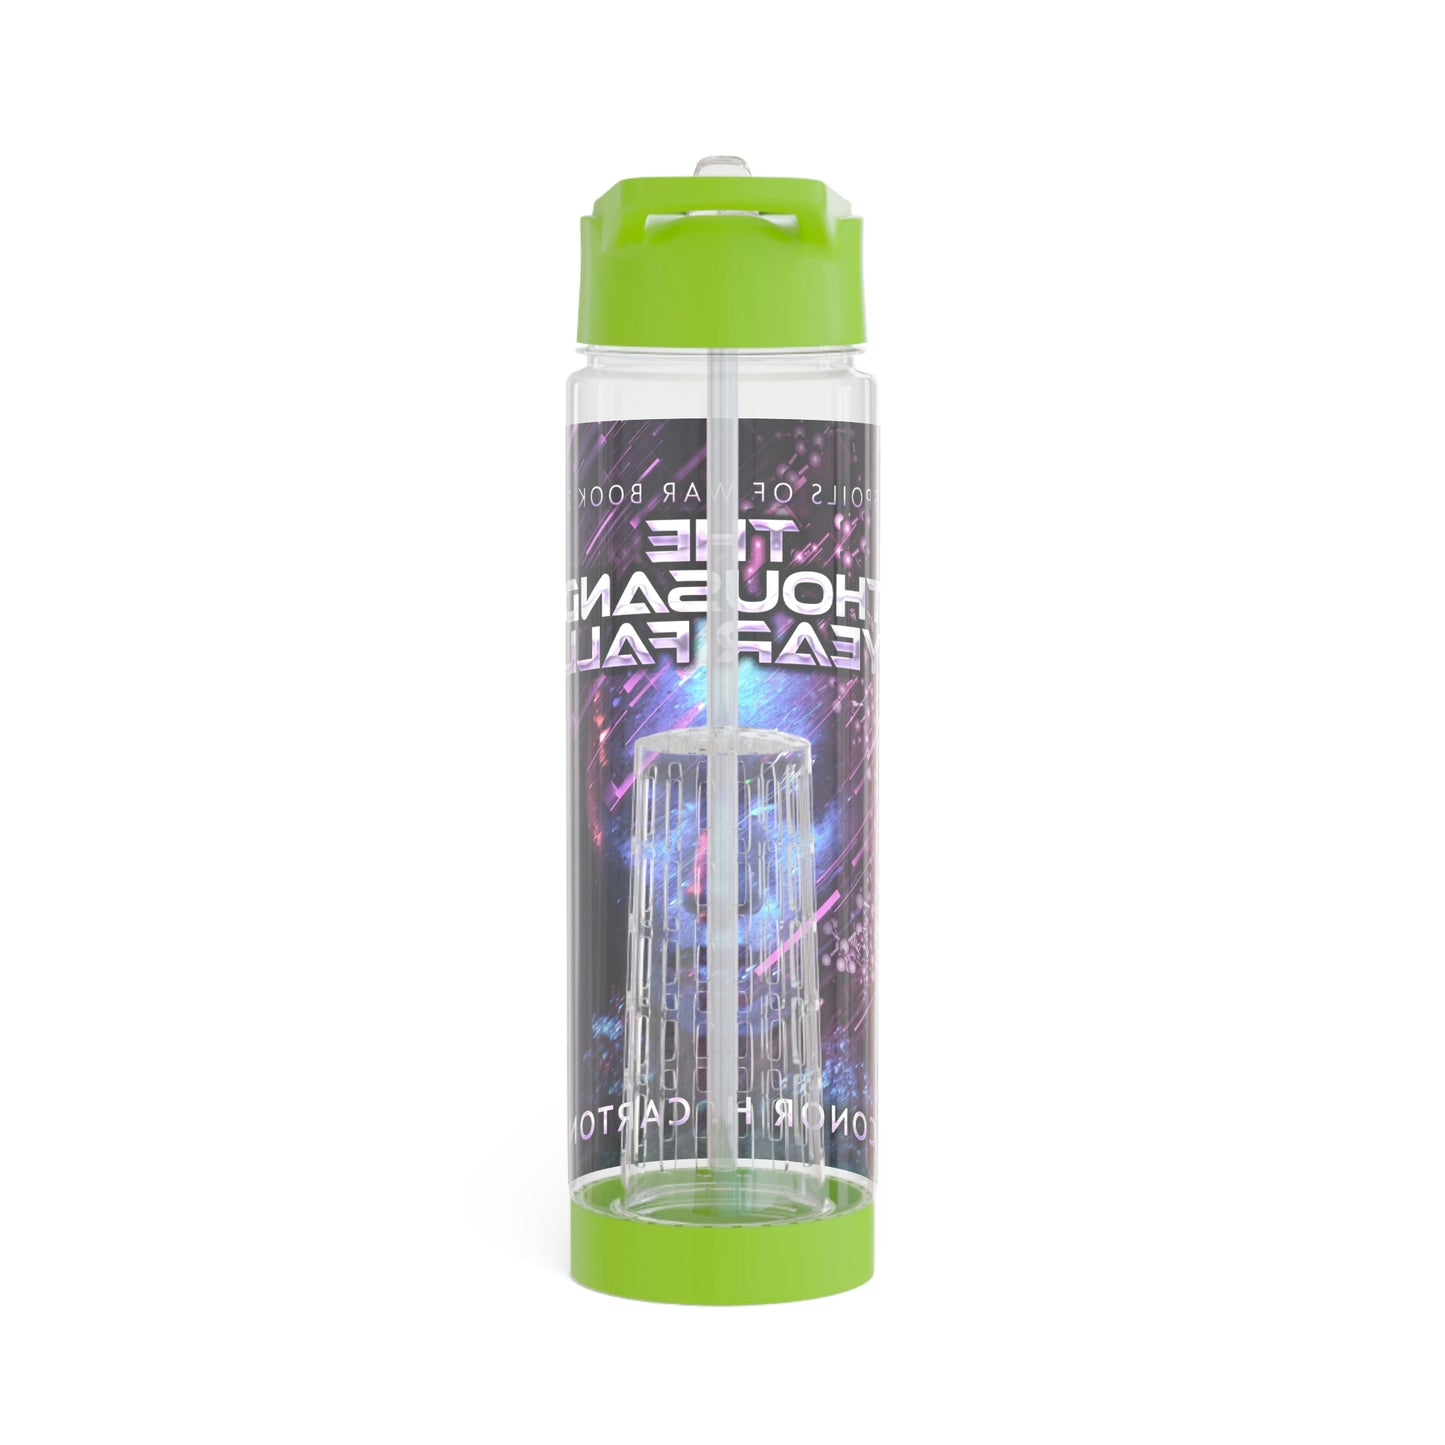 The Thousand Year Fall - Infuser Water Bottle